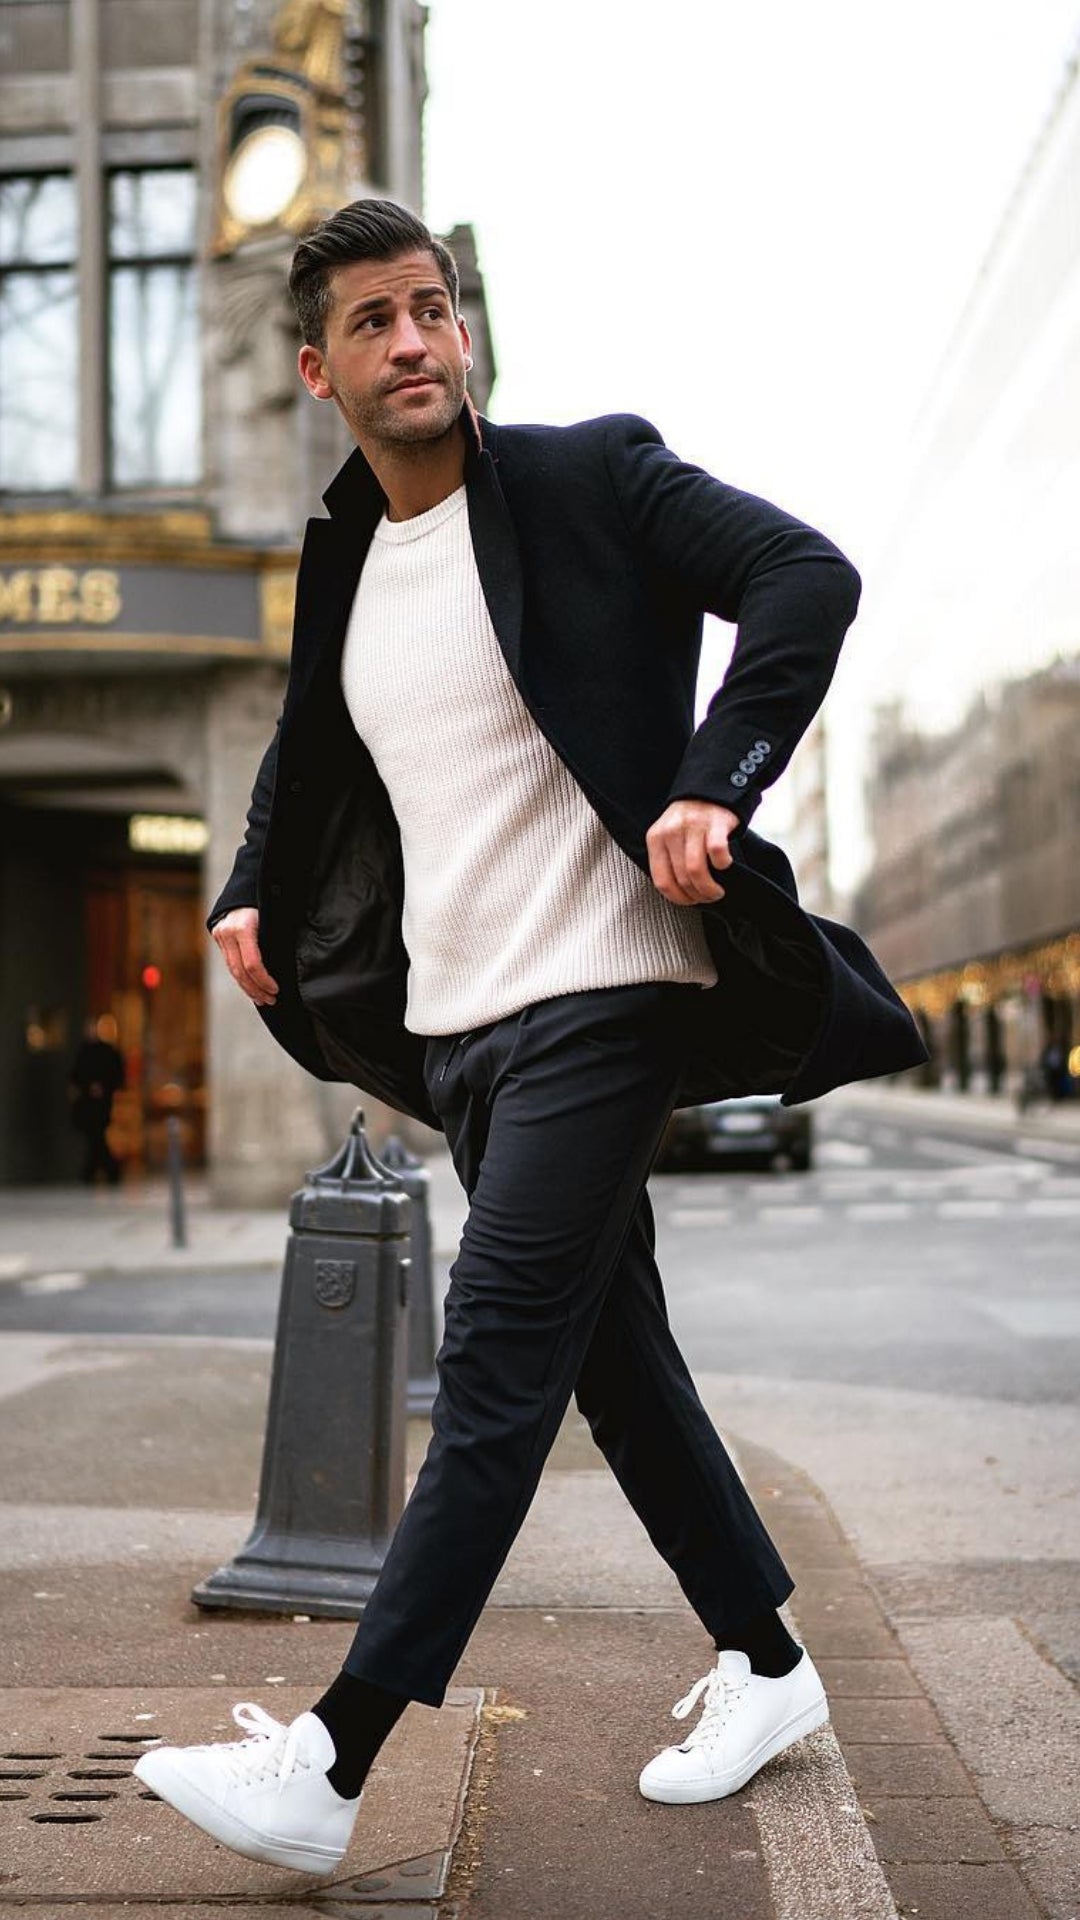 Want To Dress Sharp? Copy This Guy. – LIFESTYLE BY PS